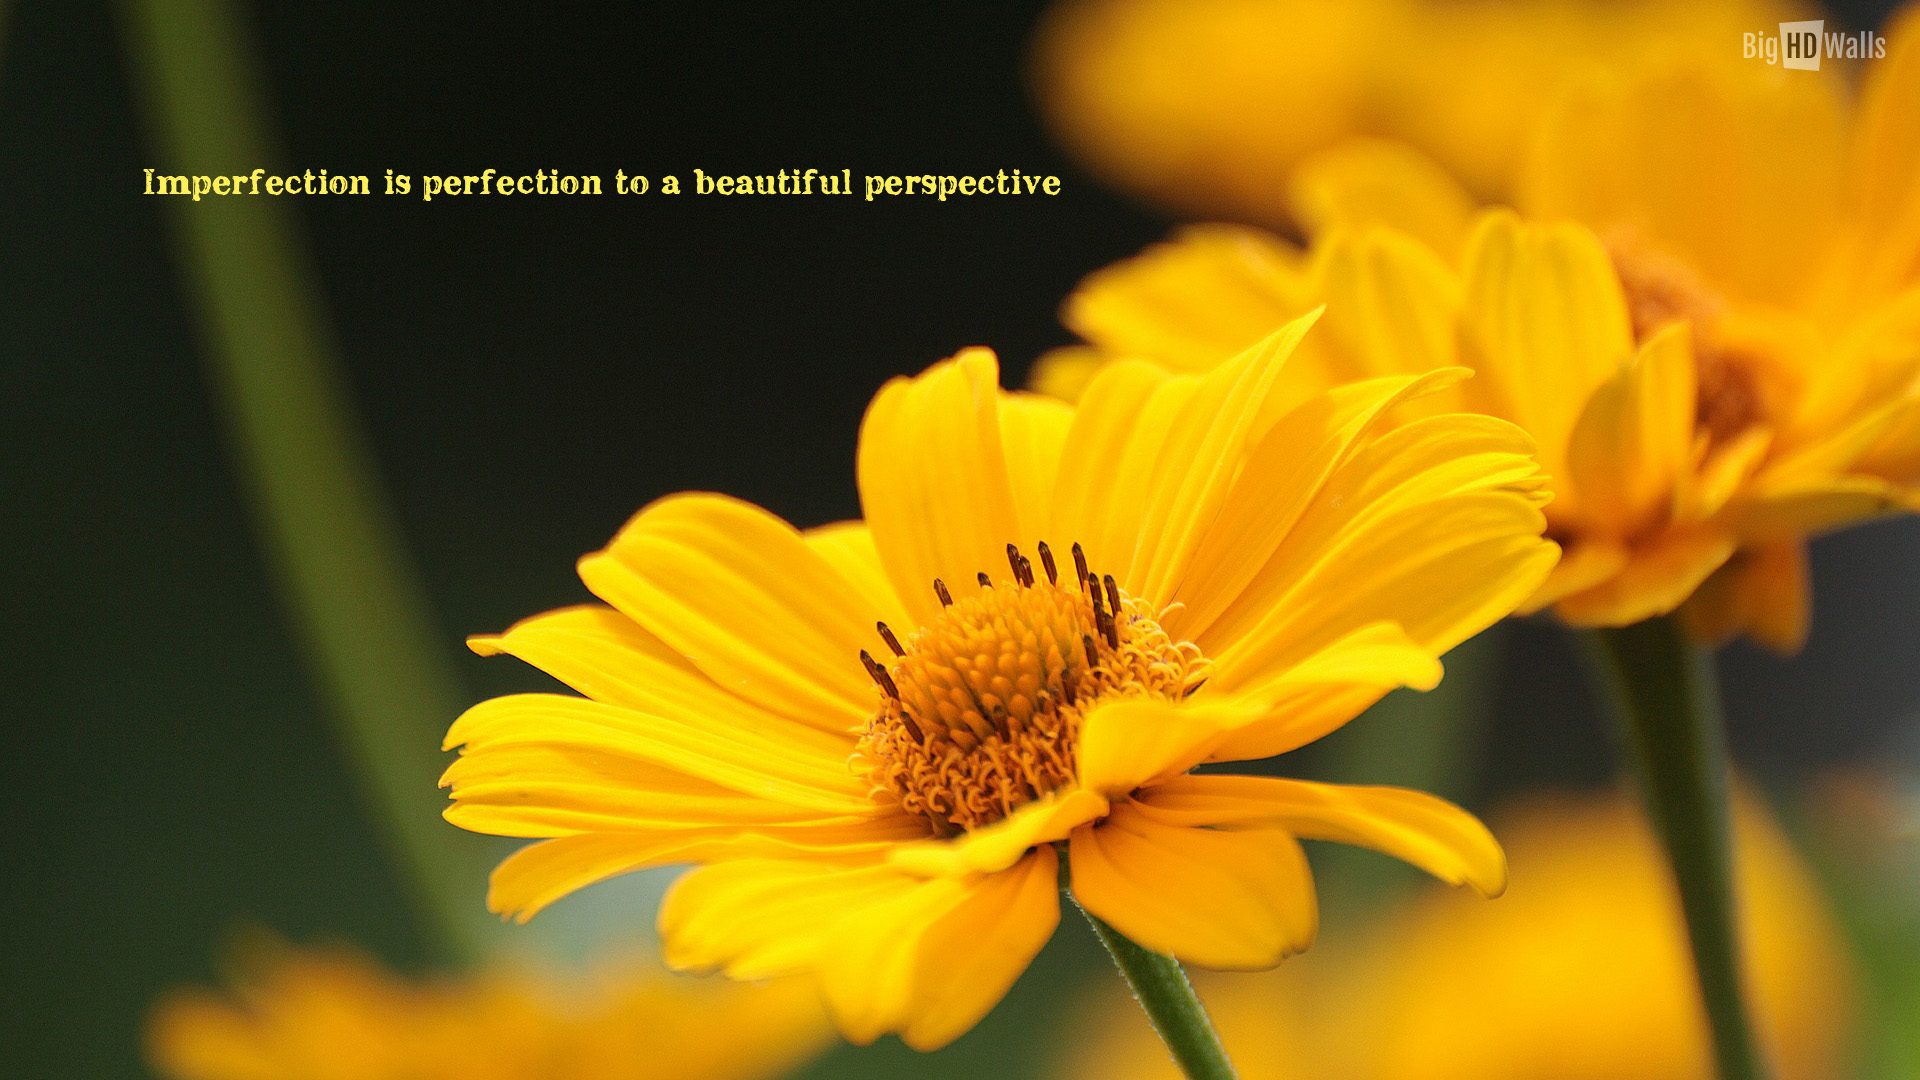 Quotes About Yellow Flowers. QuotesGram